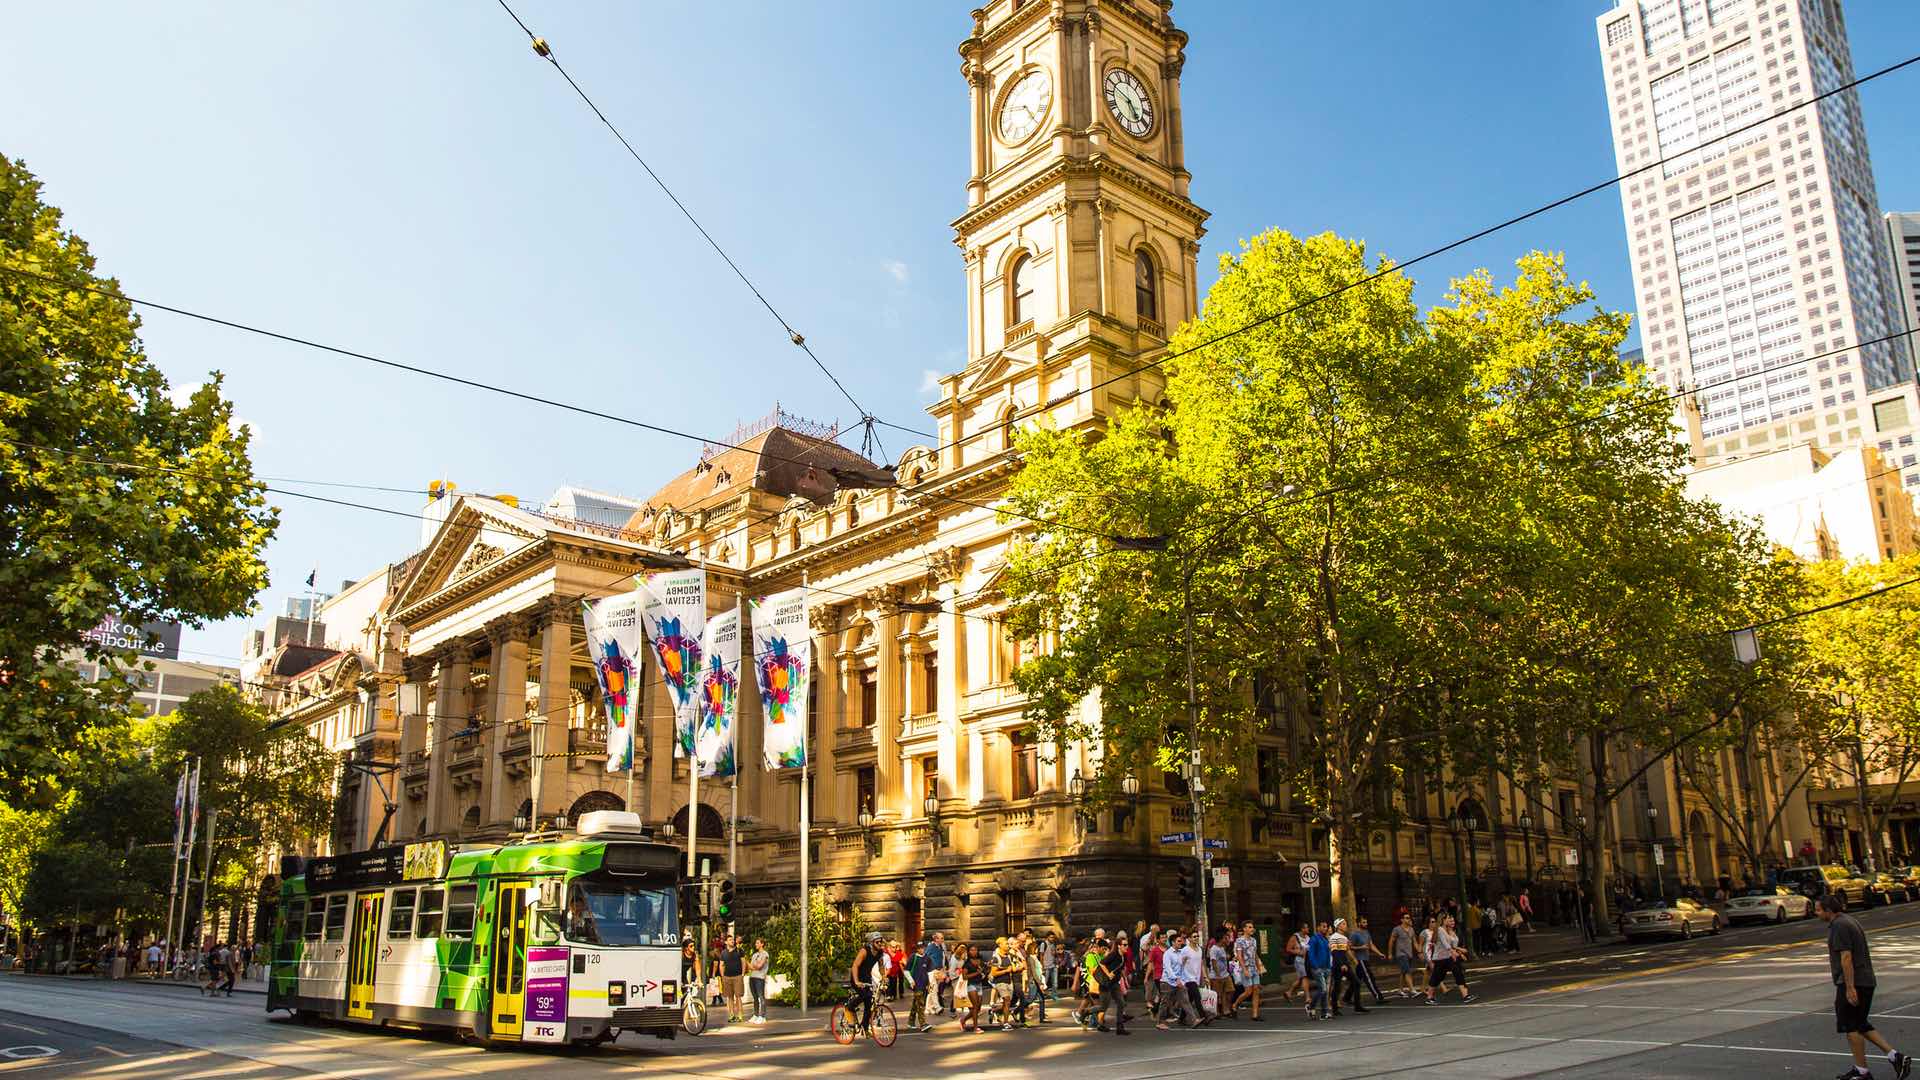 Melbourne's Tram Network Is Gearing Up for Another Two Days of Strikes